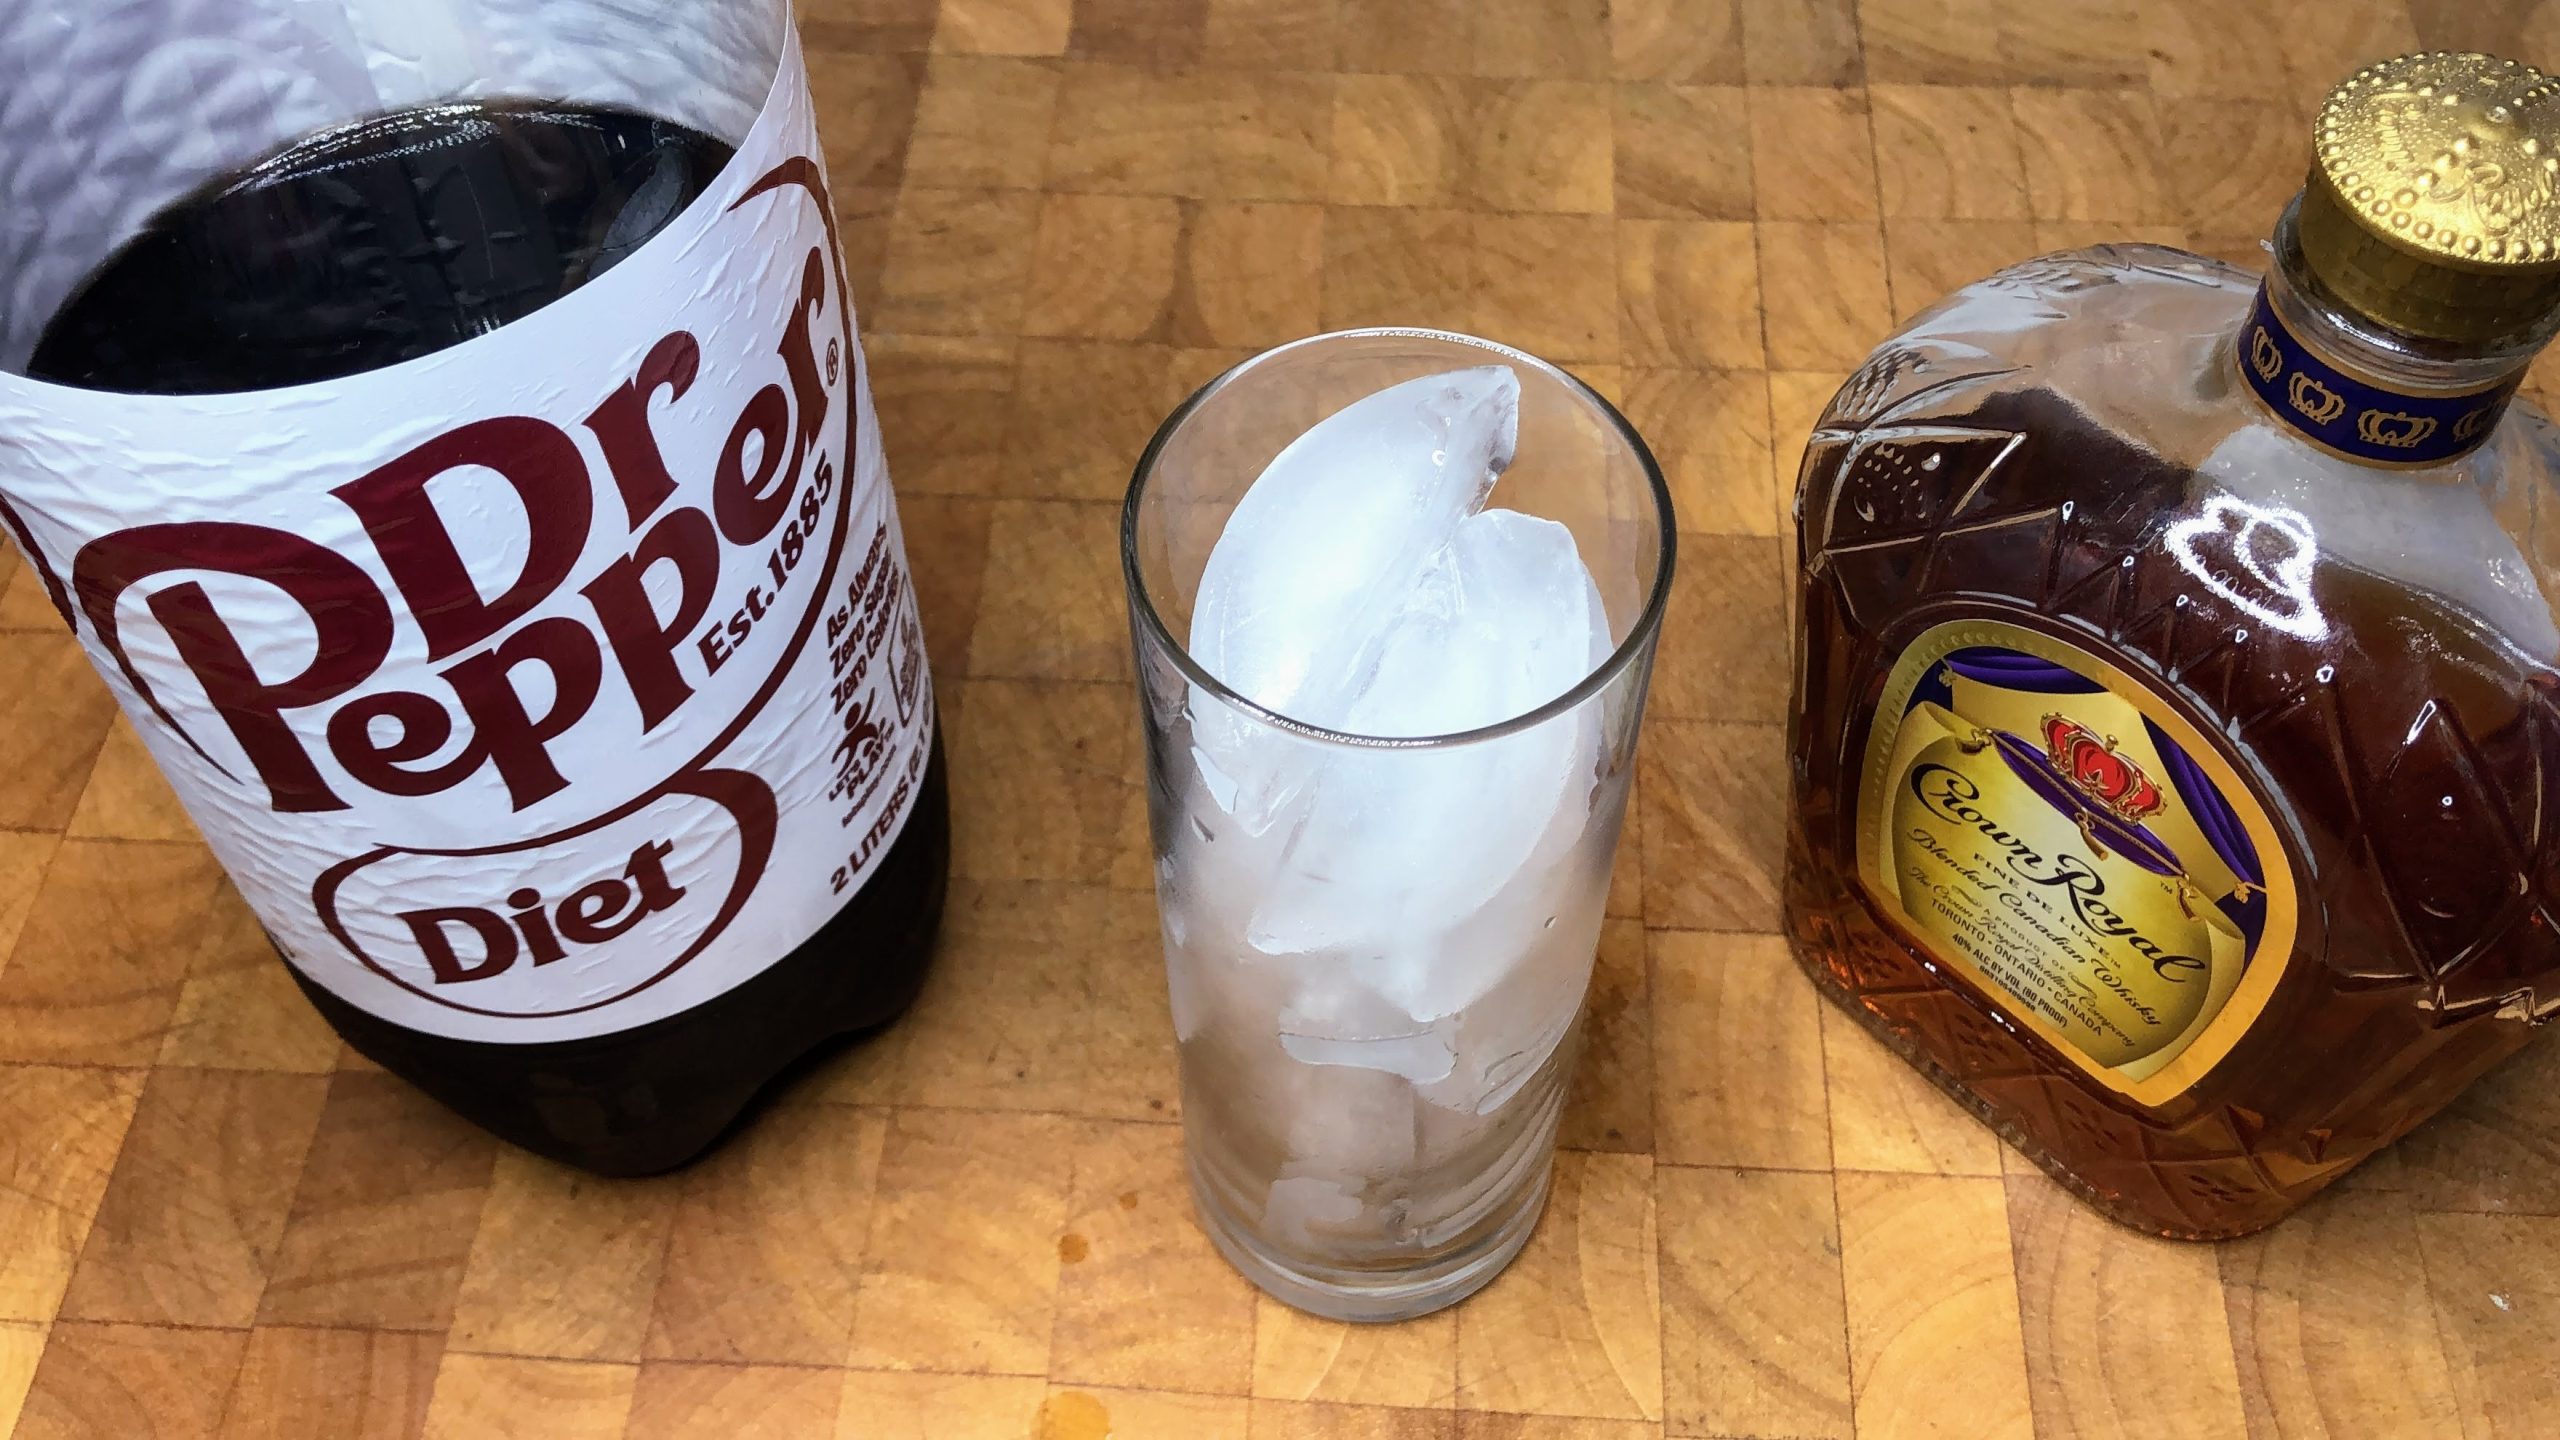 highball glass filled with ice next to bottles of crown royal and dr. pepper